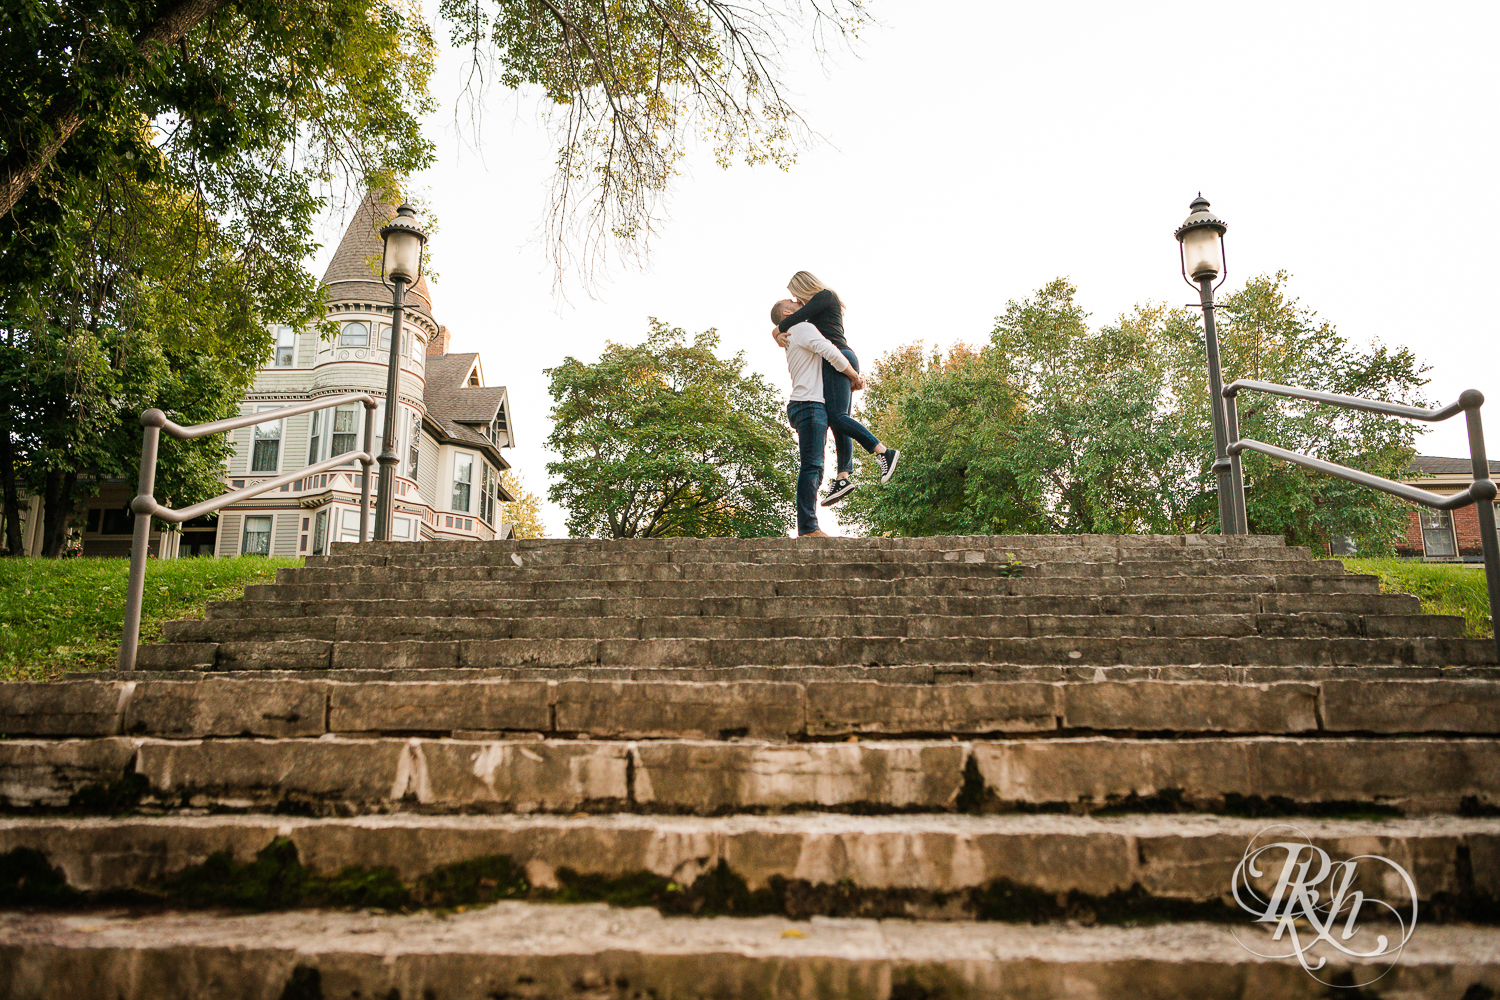 Man lifts and kisses woman at the top of the stairs at Irvine Park in Saint Paul, Minnesota.